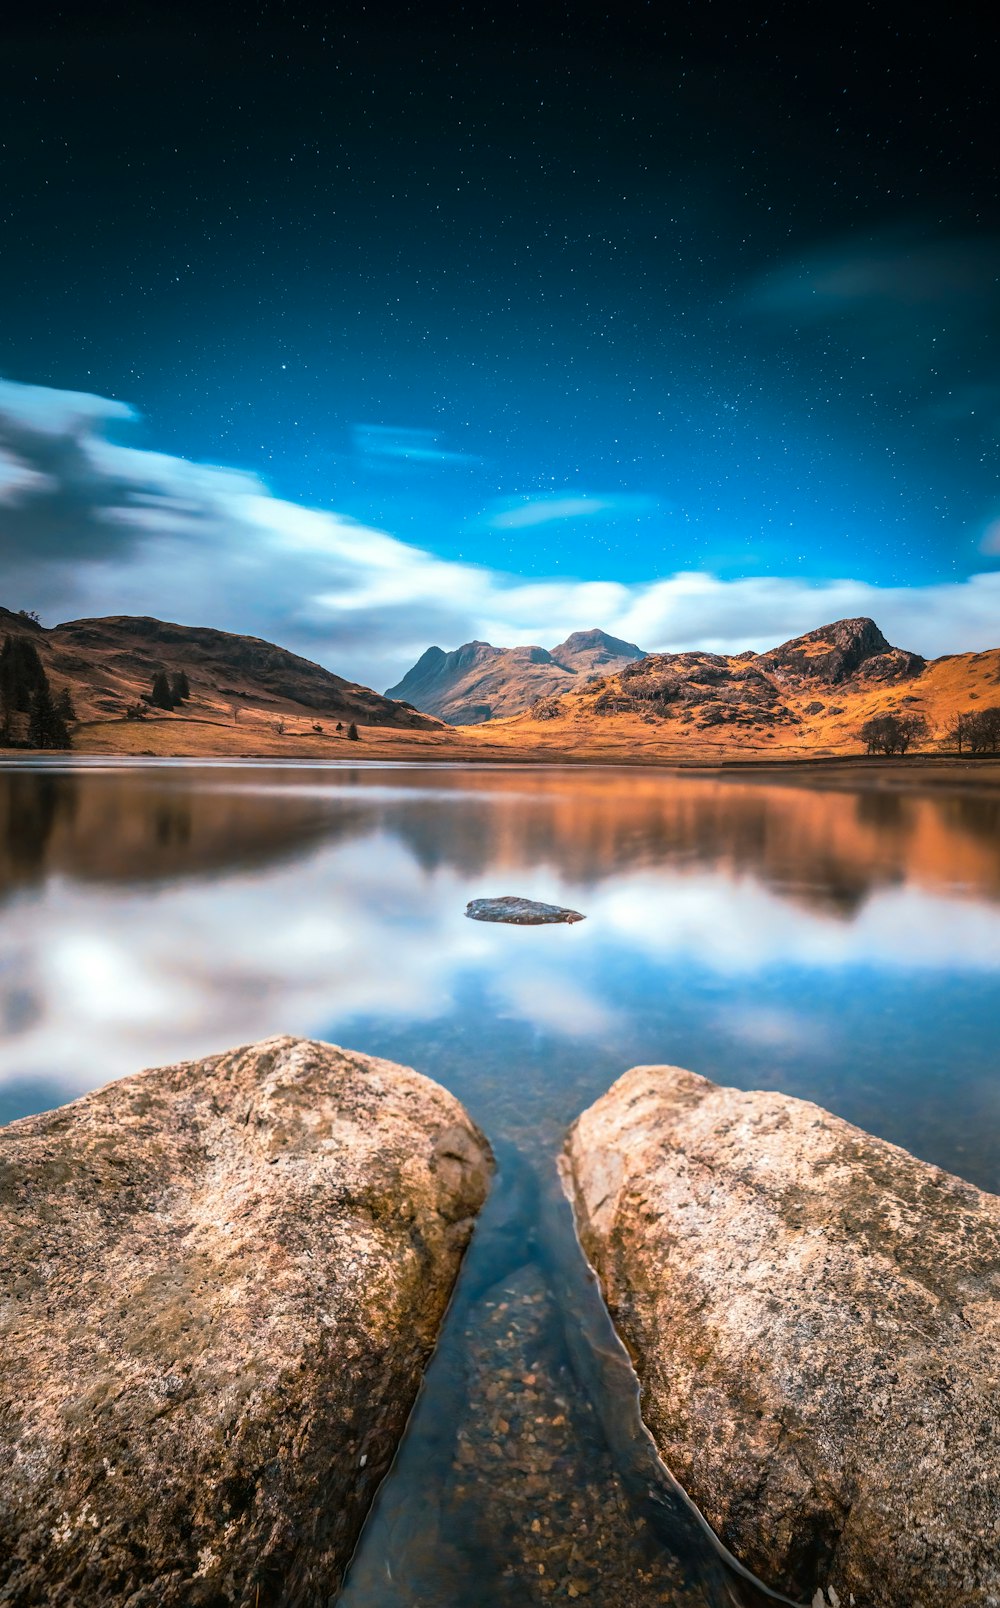 two large rocks sitting on top of a lake under a night sky